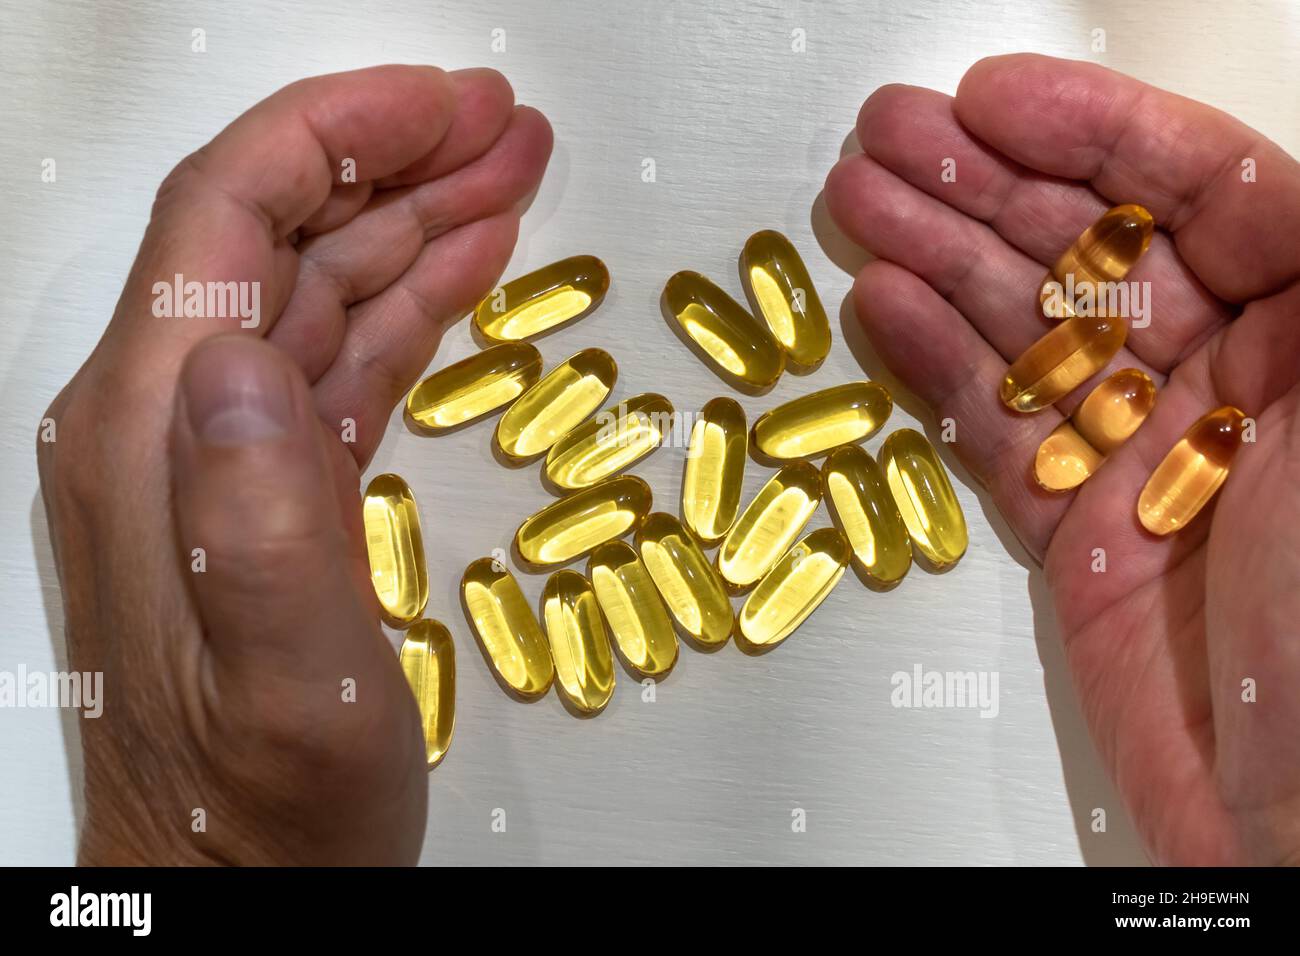 Vitamin capsules in hand palms close-up on white table Stock Photo